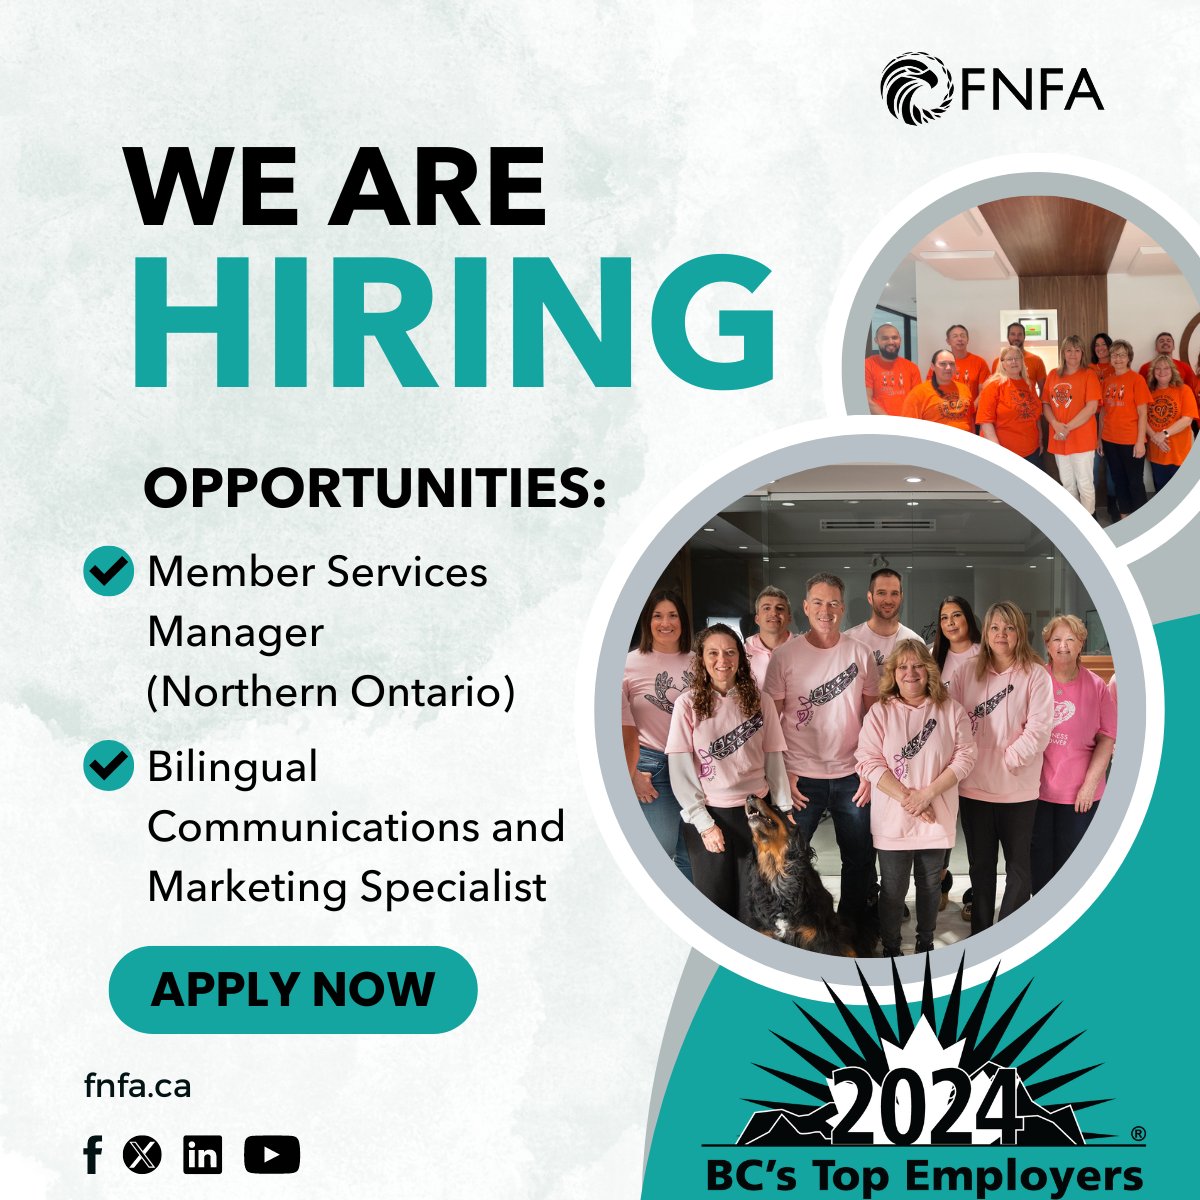 Join the FNFA Team Today!  #Apply now and help unlock a brighter future!

You can view the employment listings below: 
🔗 nationtalk.ca/job/member-ser…
🔗nationtalk.ca/job/bilingual-…

#FNFA #StrongerTogether #Hiring #Jobs #IndigenousEconomy